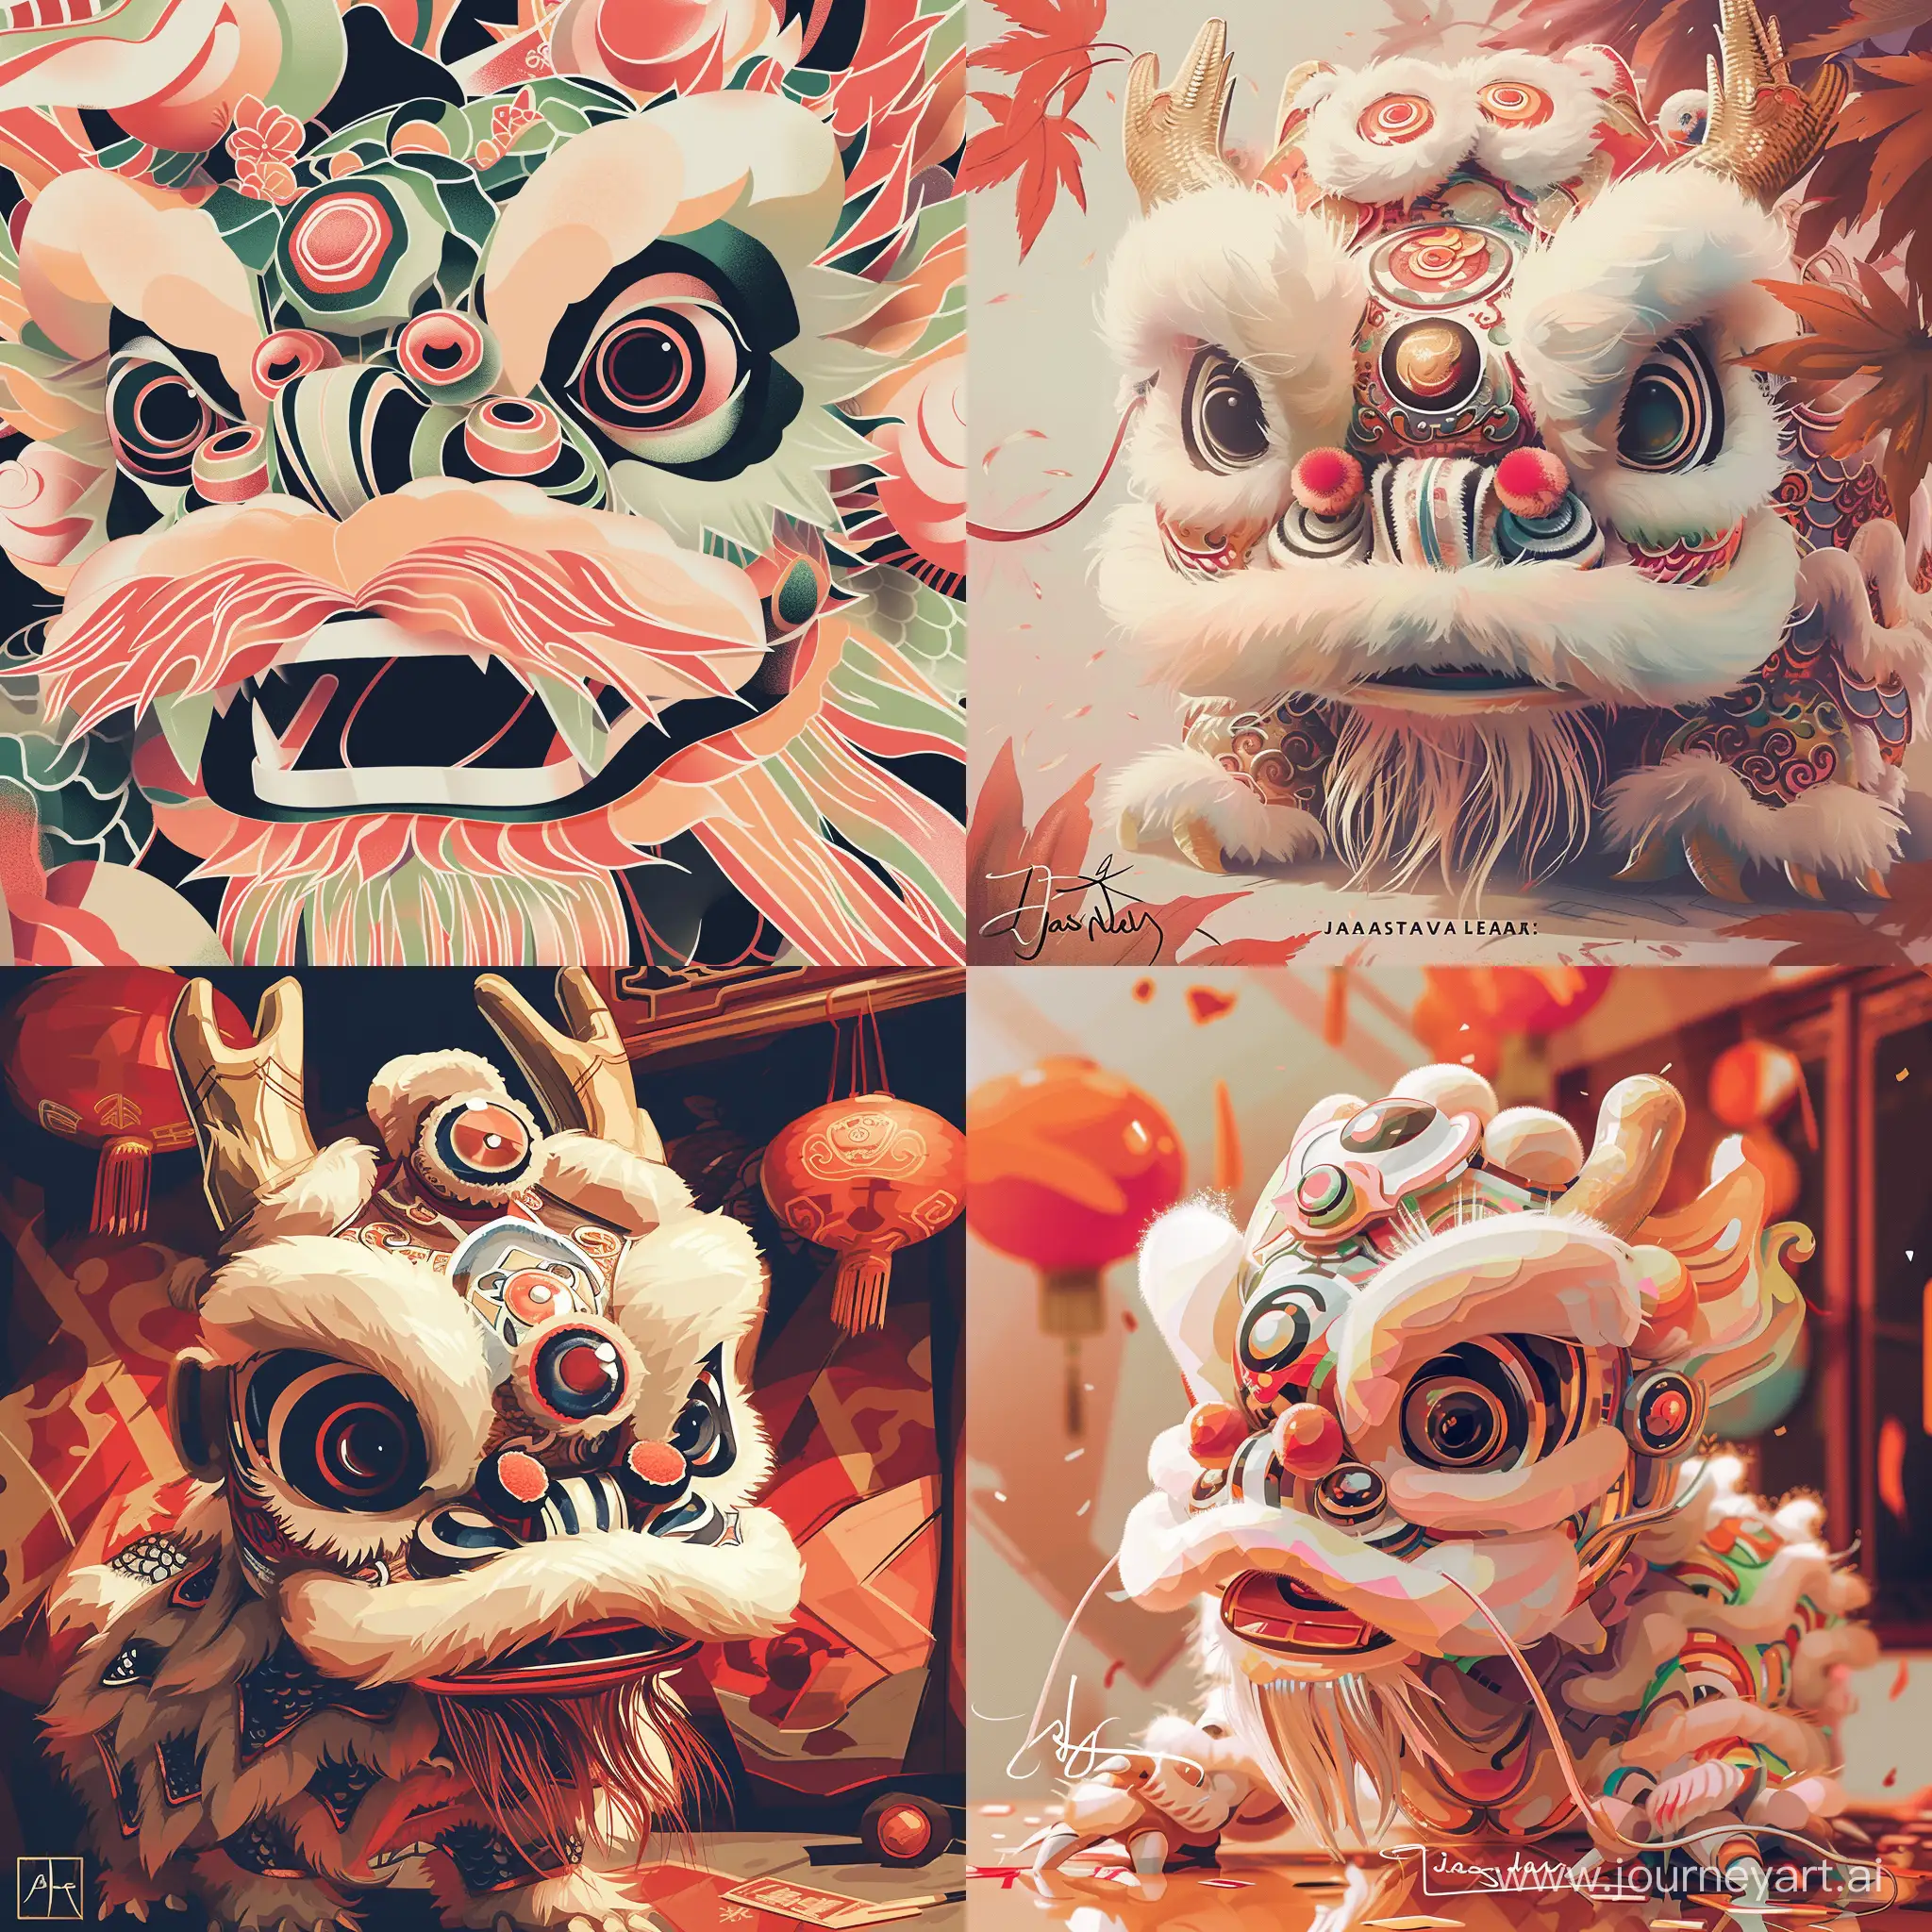 Create an illustration of an adorable baby Chinese dragon in the style of James Jean. The scene should be infused with the festive spirit of Chinese New Year, with the dragon's head in a close-up view, showcasing its innocent and delightful expression. Emphasize abstract and simple lines to form the dragon's silhouette and details. The image should employ multi-color and sophisticated color matching techniques to bring out the celebration's vibrancy. Aim for a 3:4 aspect ratio, high definition with a scale of 1000, and utilize the capabilities of version 6.0.